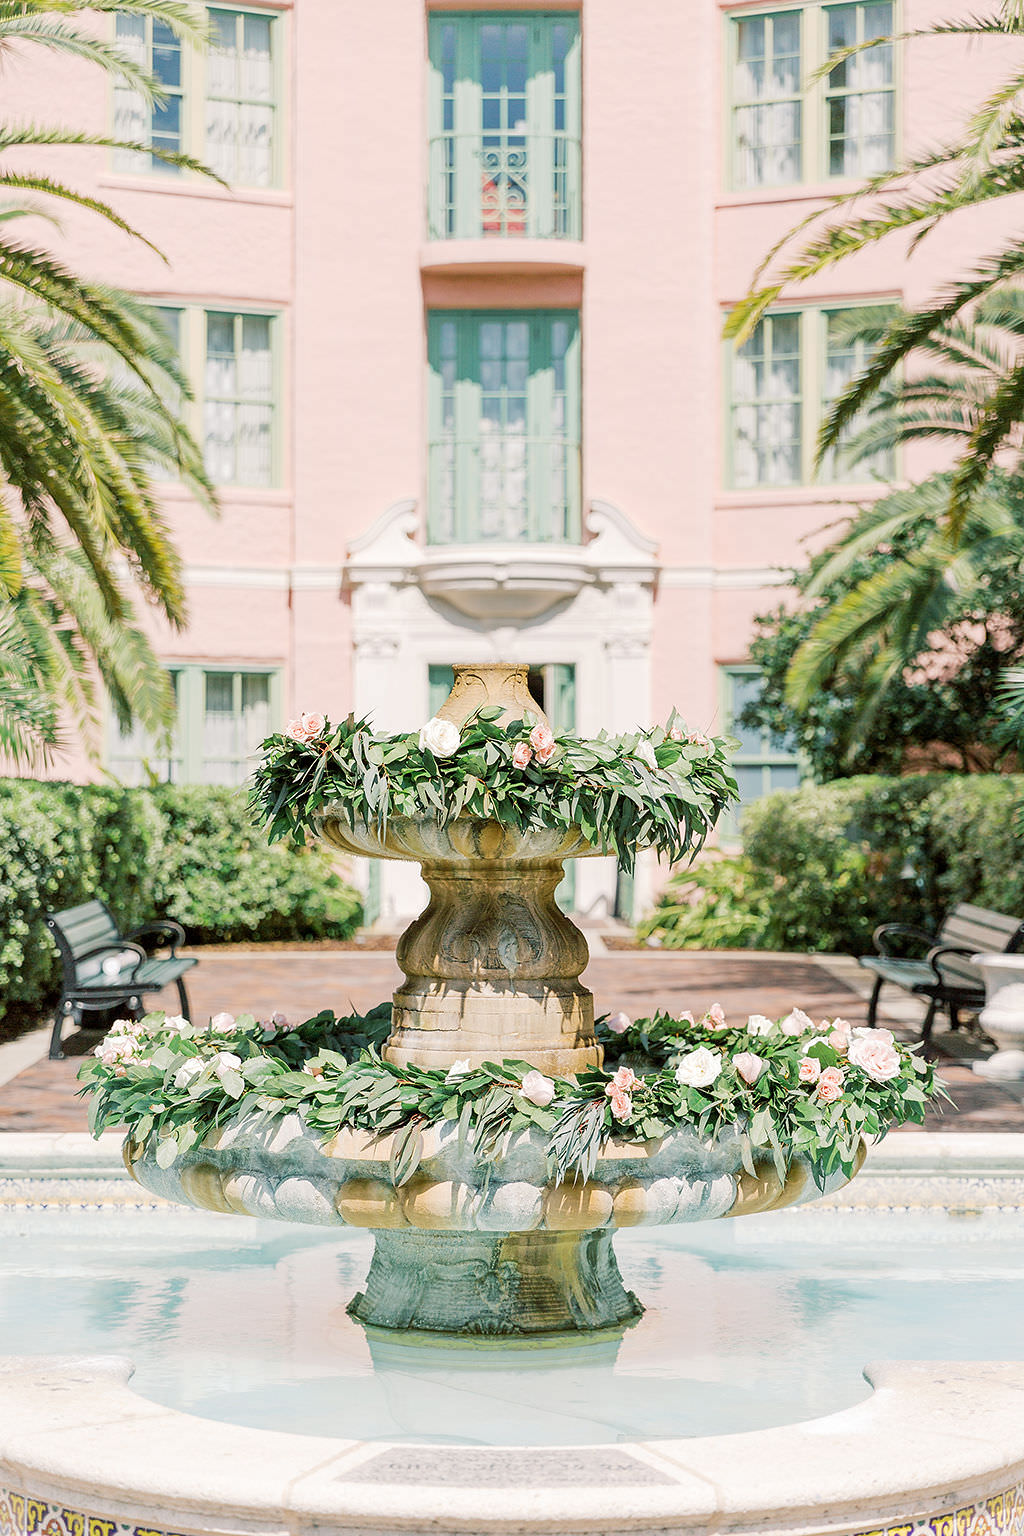 Elegant Outdoor Courtyard Wedding Ceremony Decor, Water Fountain with Greenery Wreaths and White and Blush Pink Florals | St. Petersburg Hotel Wedding Venue The Vinoy Renaissance